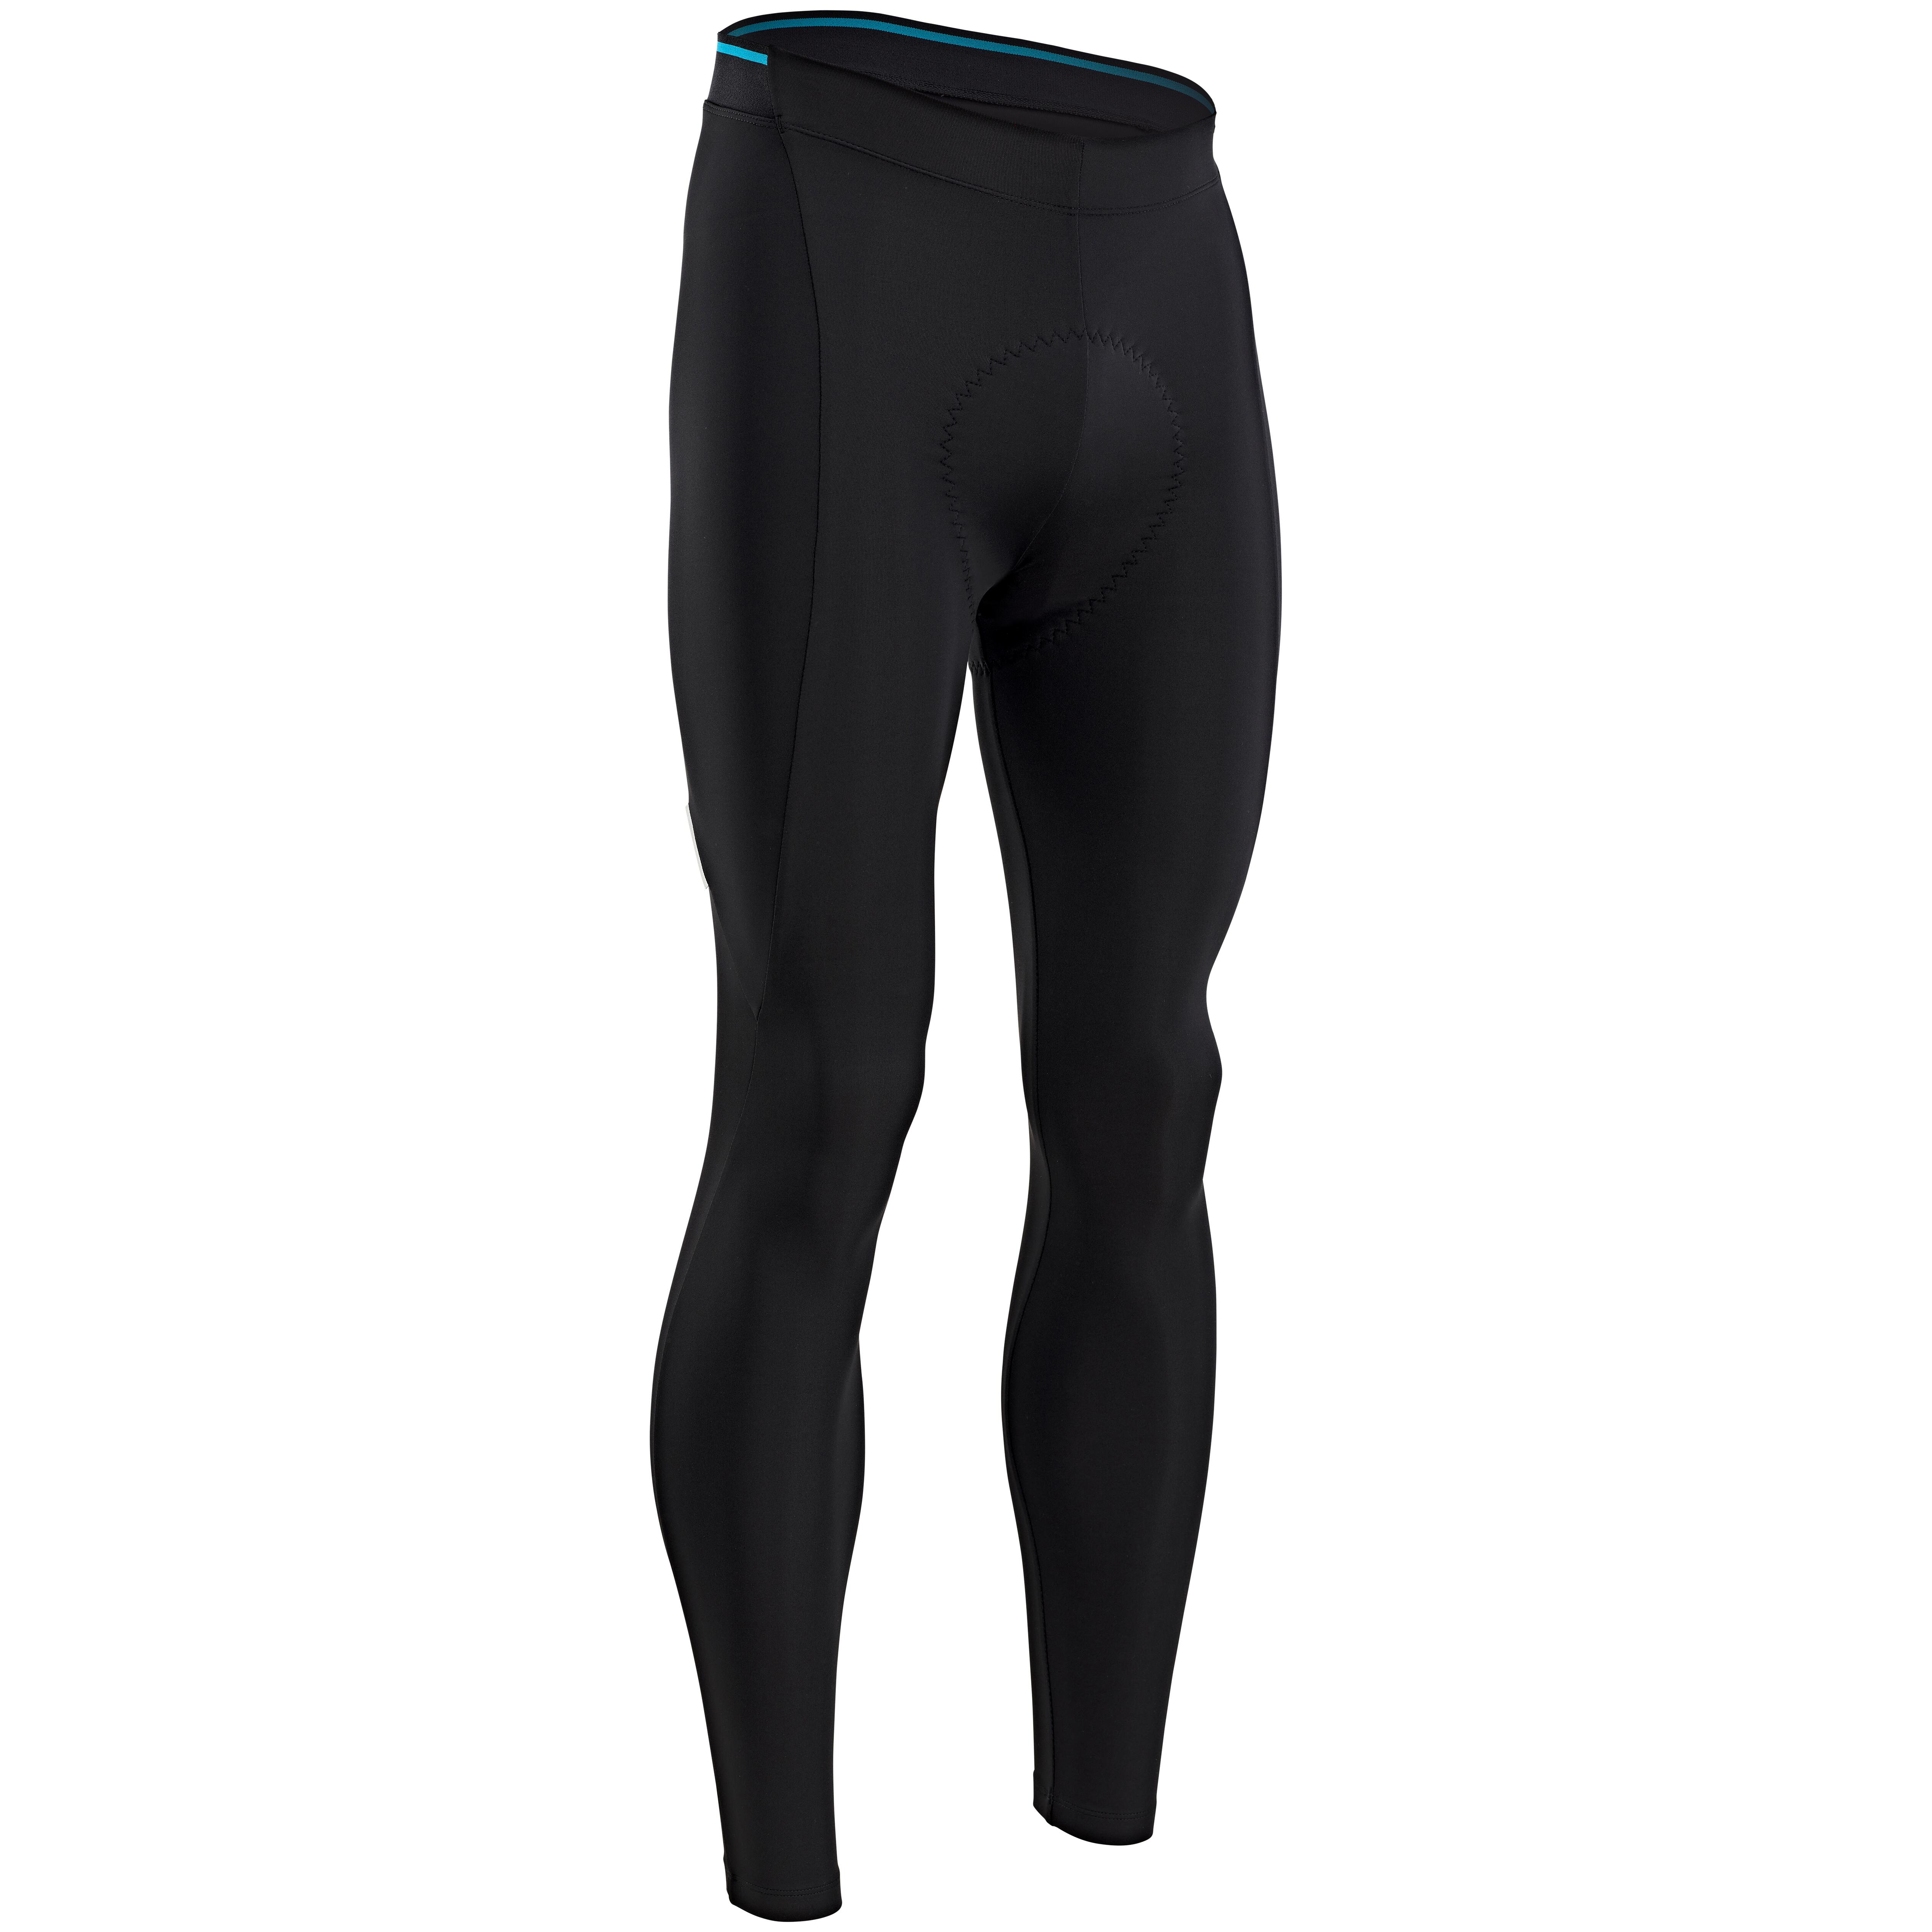 Fashion Cycling Tights, Sport Compression Leggings For Men, Fitness Gym  Running Leggings,STRAVA White 4 @ Best Price Online | Jumia Kenya